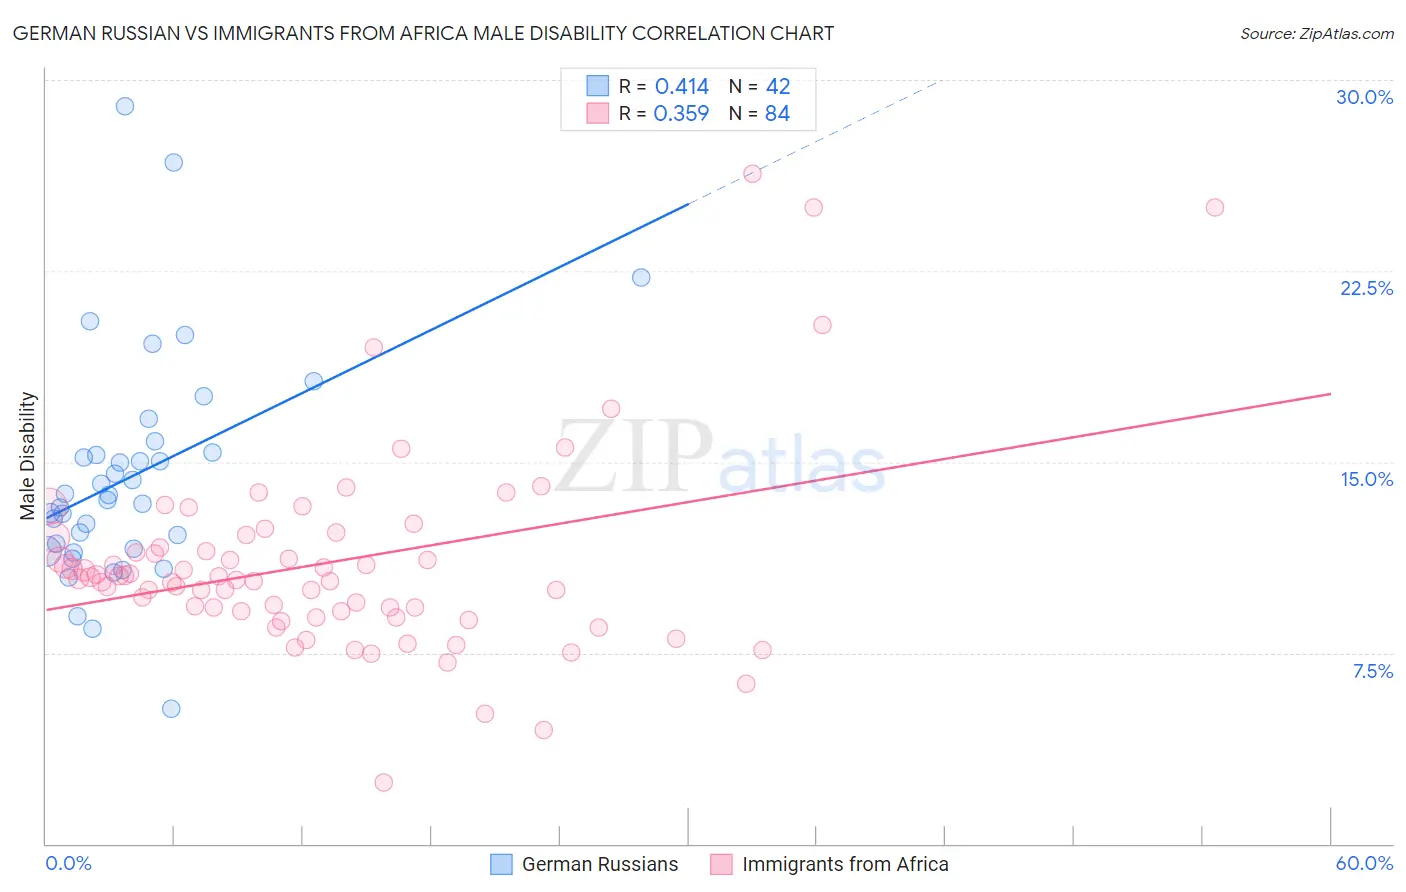 German Russian vs Immigrants from Africa Male Disability